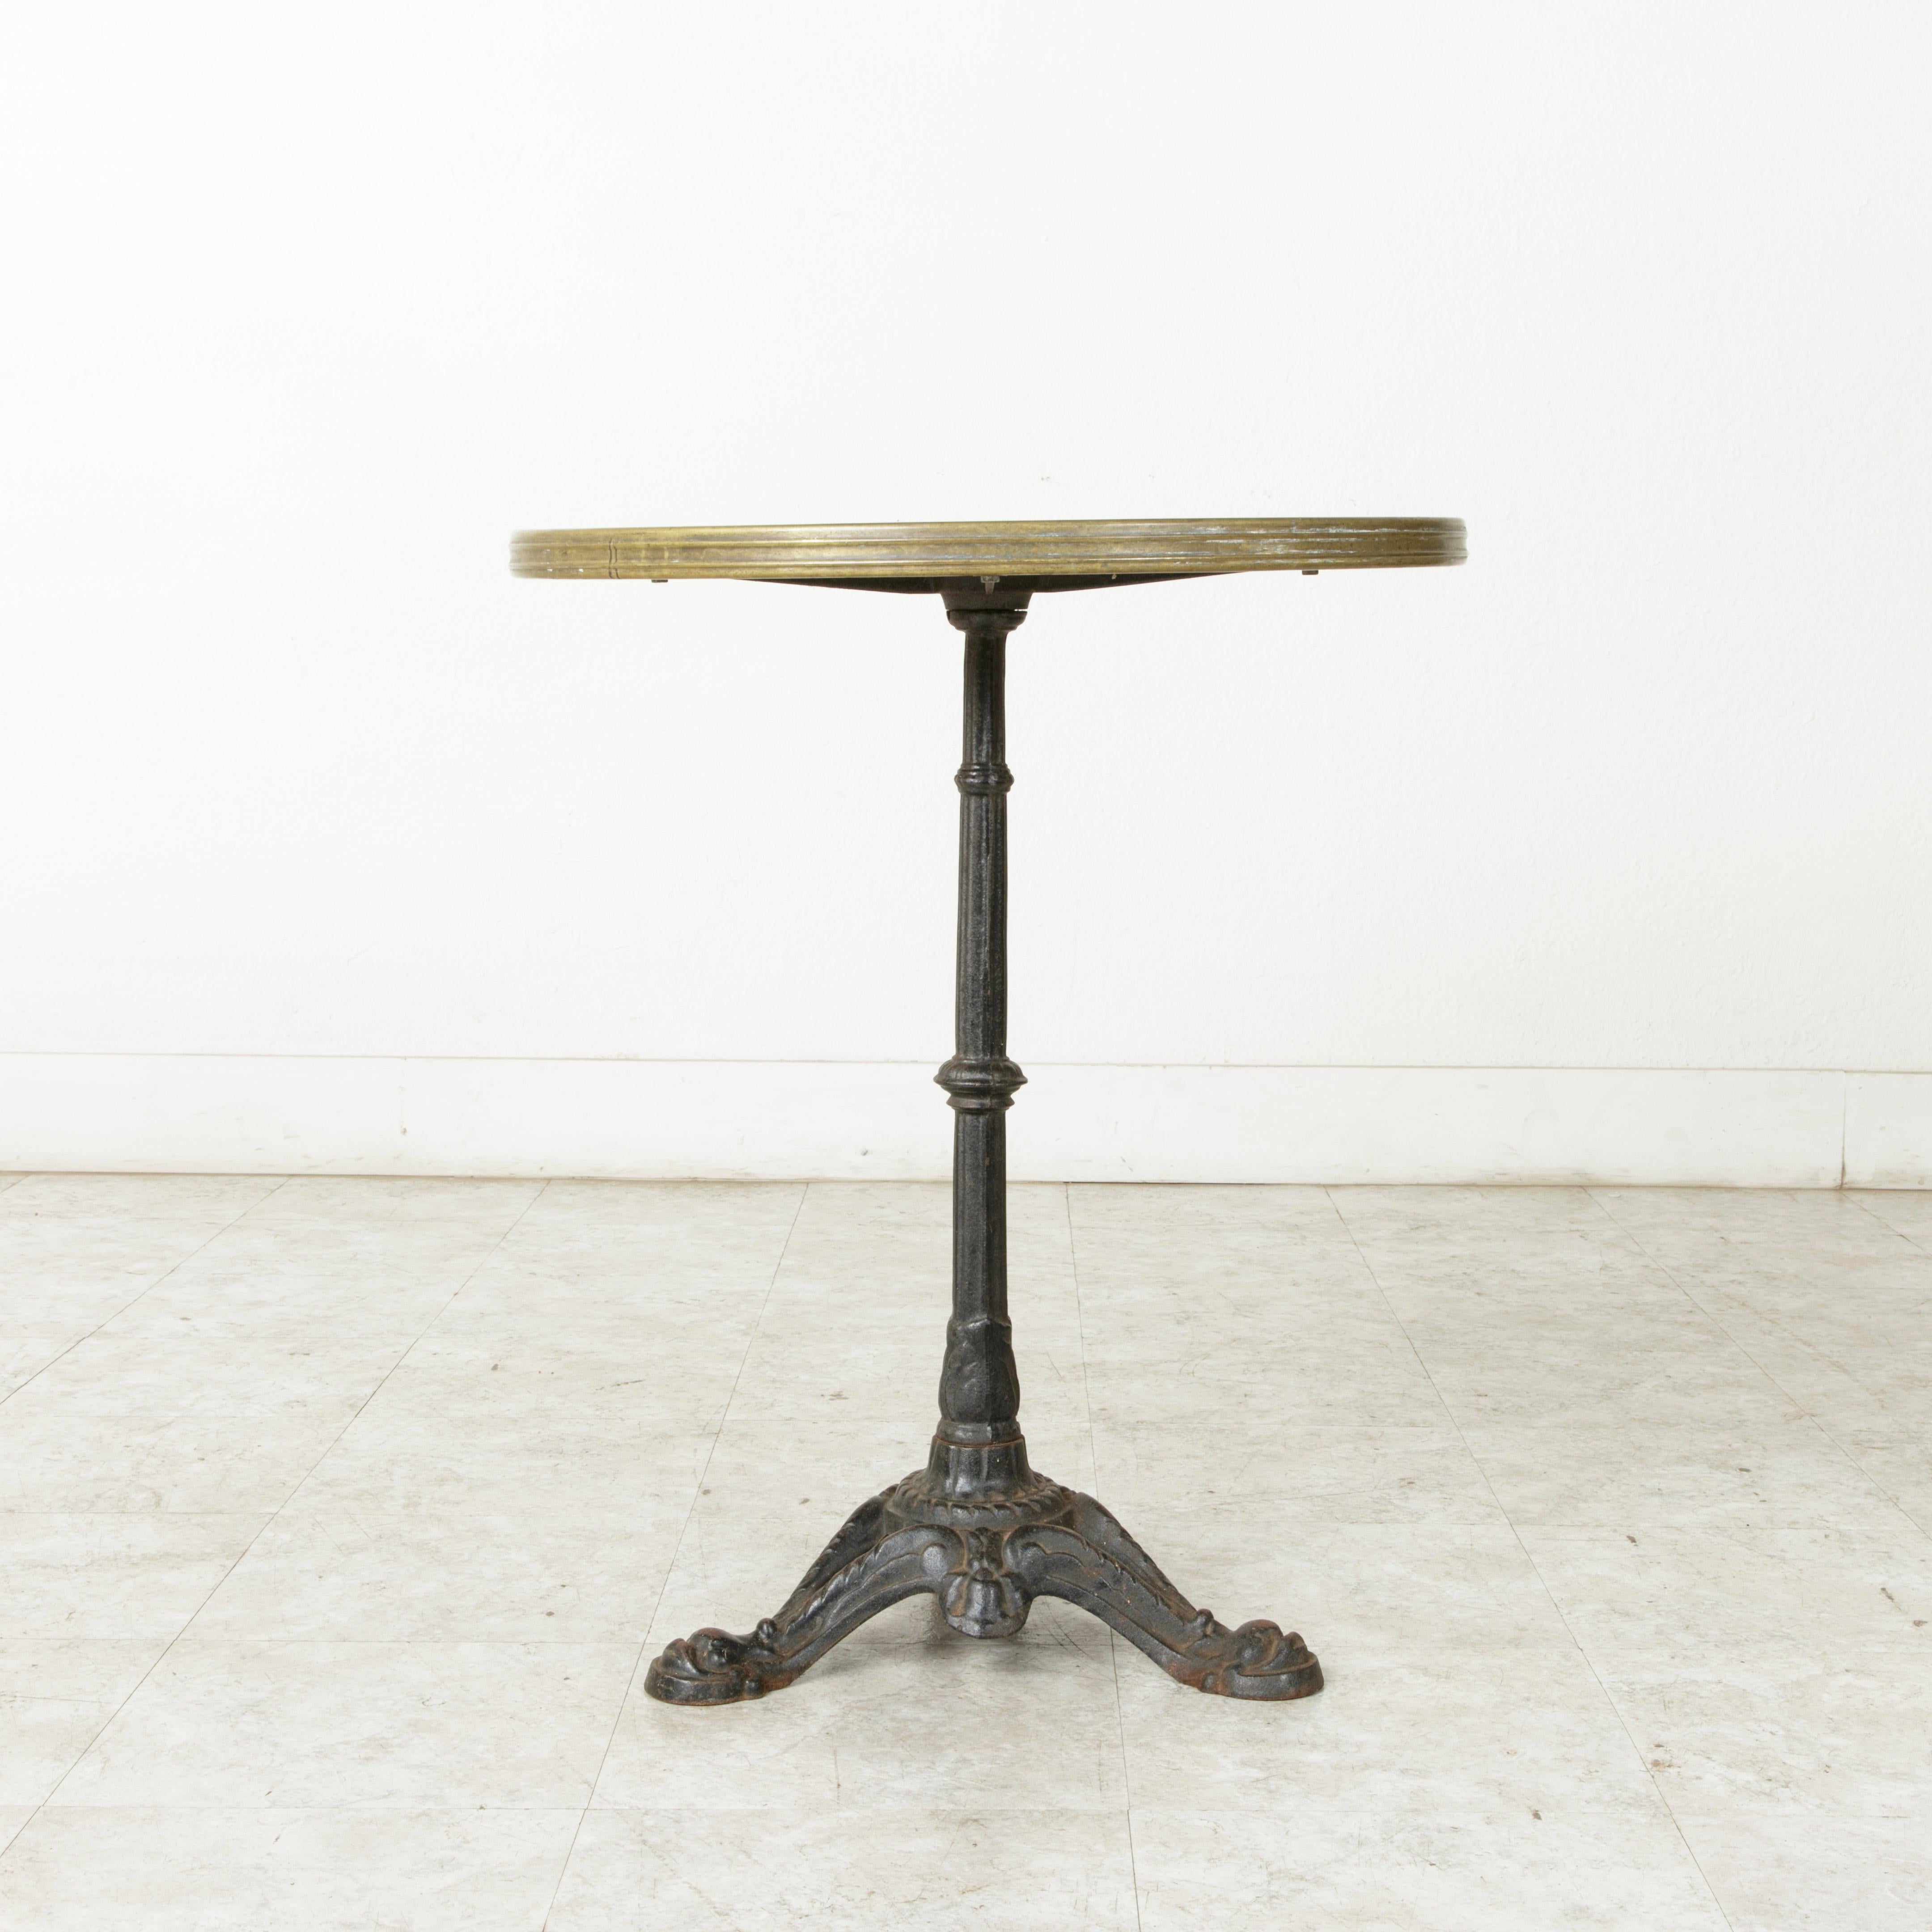 This midcentury French bistro table features a cast iron base detailed with fluting and stylized dolphin heads. Its generous 23.75 inch diameter Formica top is larger than its earlier counterparts and is trimmed with brass banding. Reminiscent of